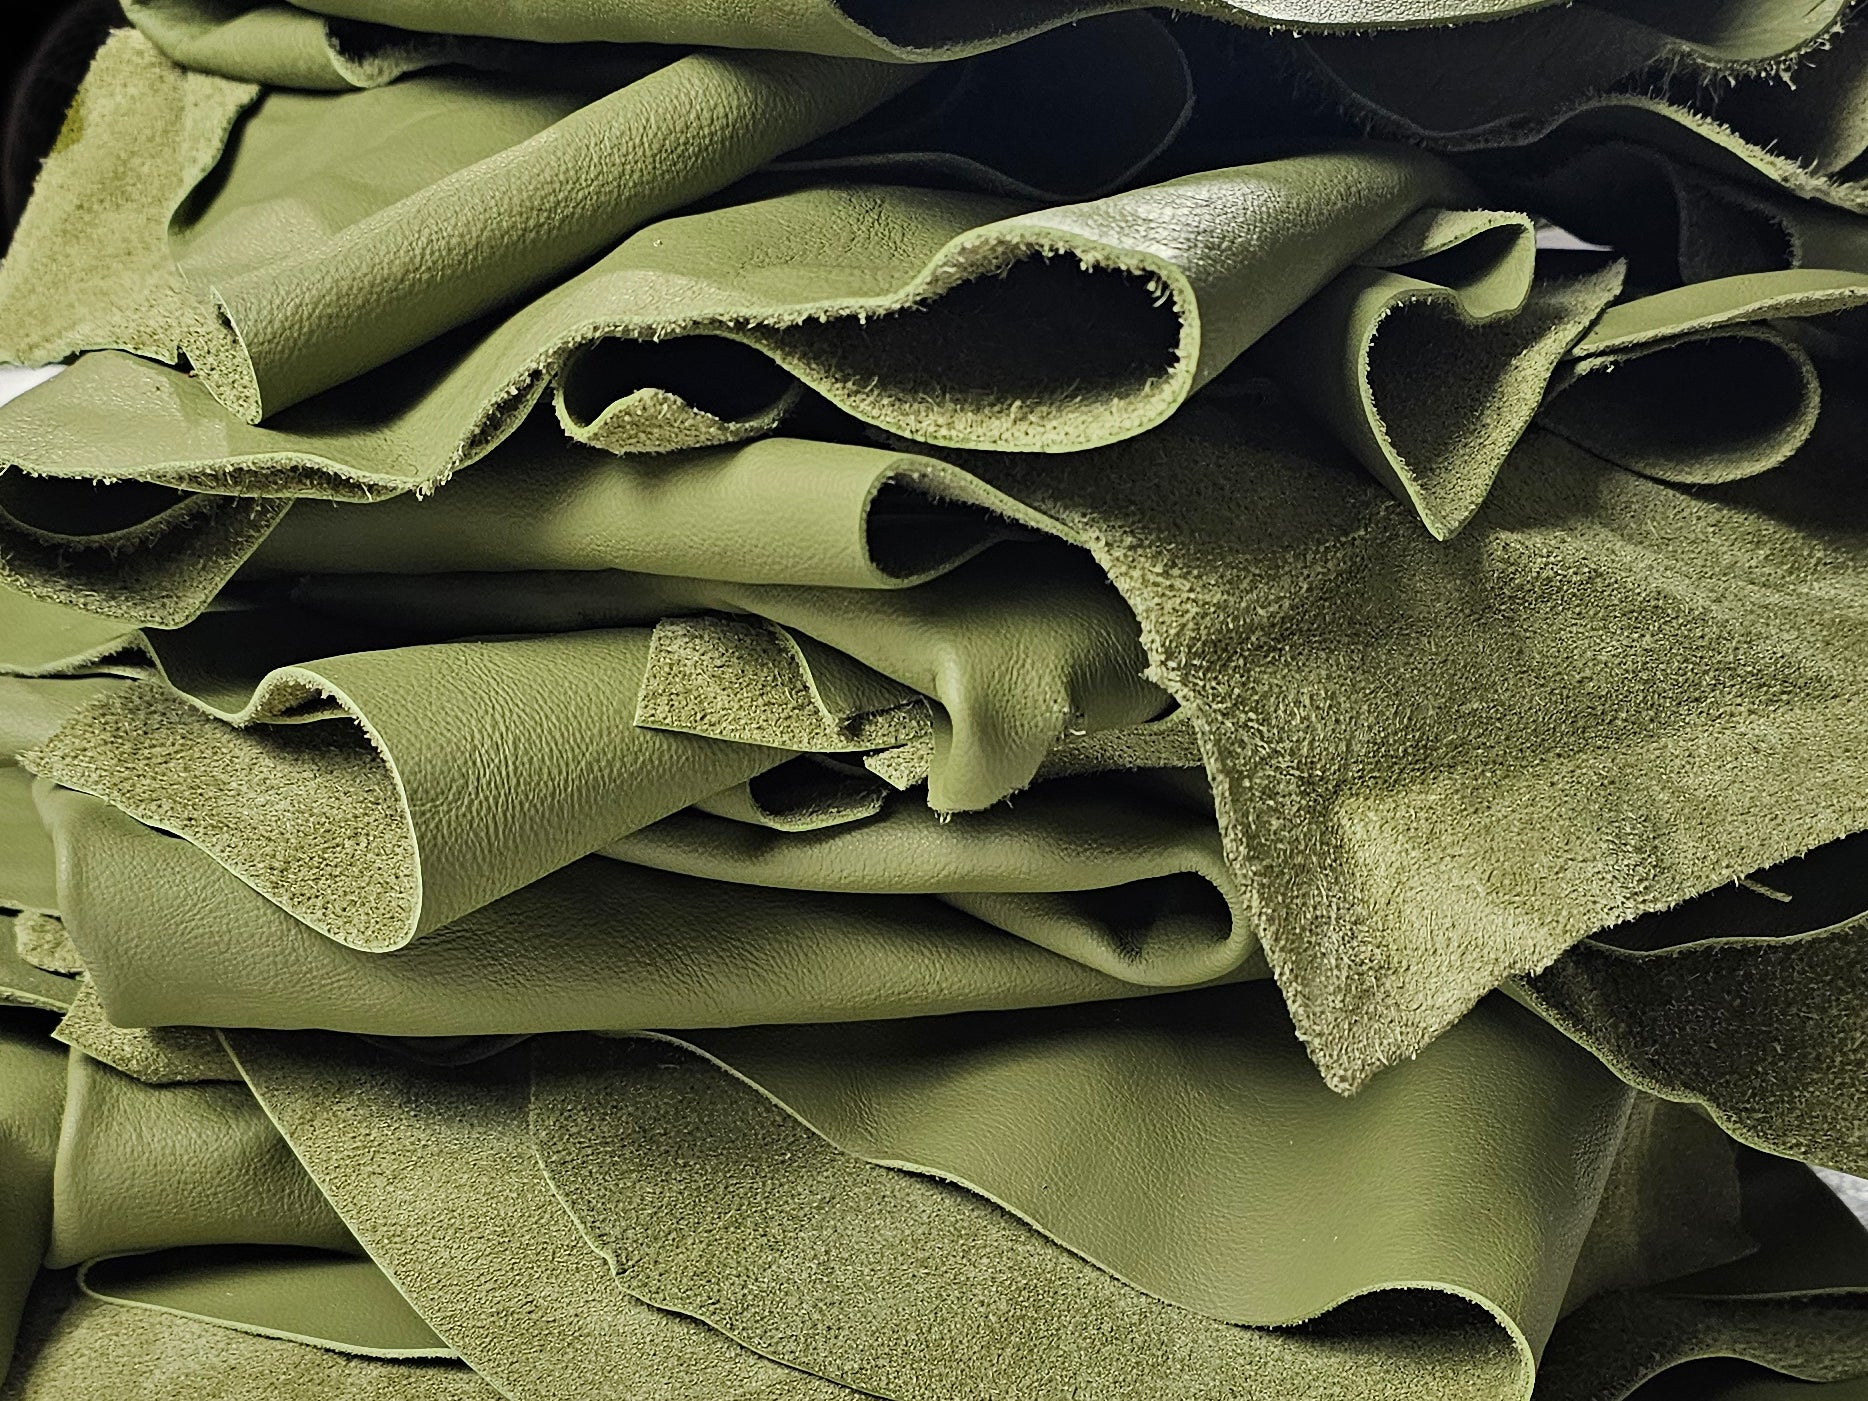 Apple Green leather scraps for crafts 1 - 2 sq ft